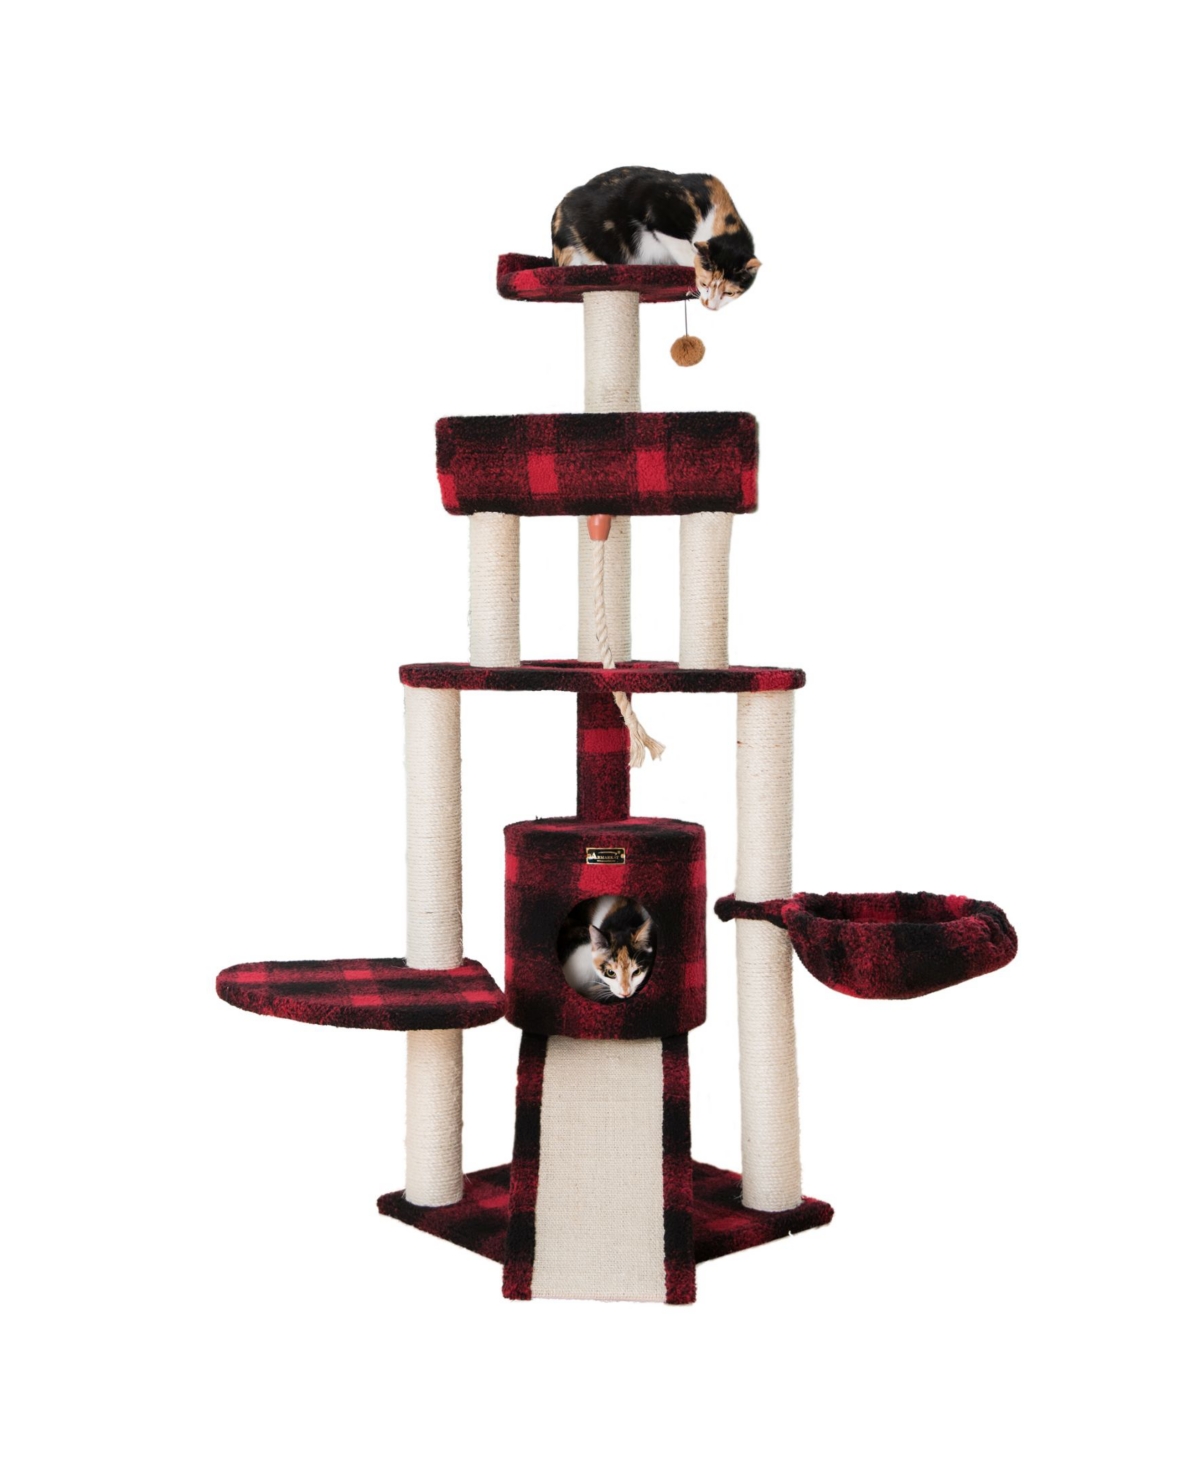 Real Wood Cat Tree, 4 Levels With Rope, Ramp, Perch, & Condo - Black and Red